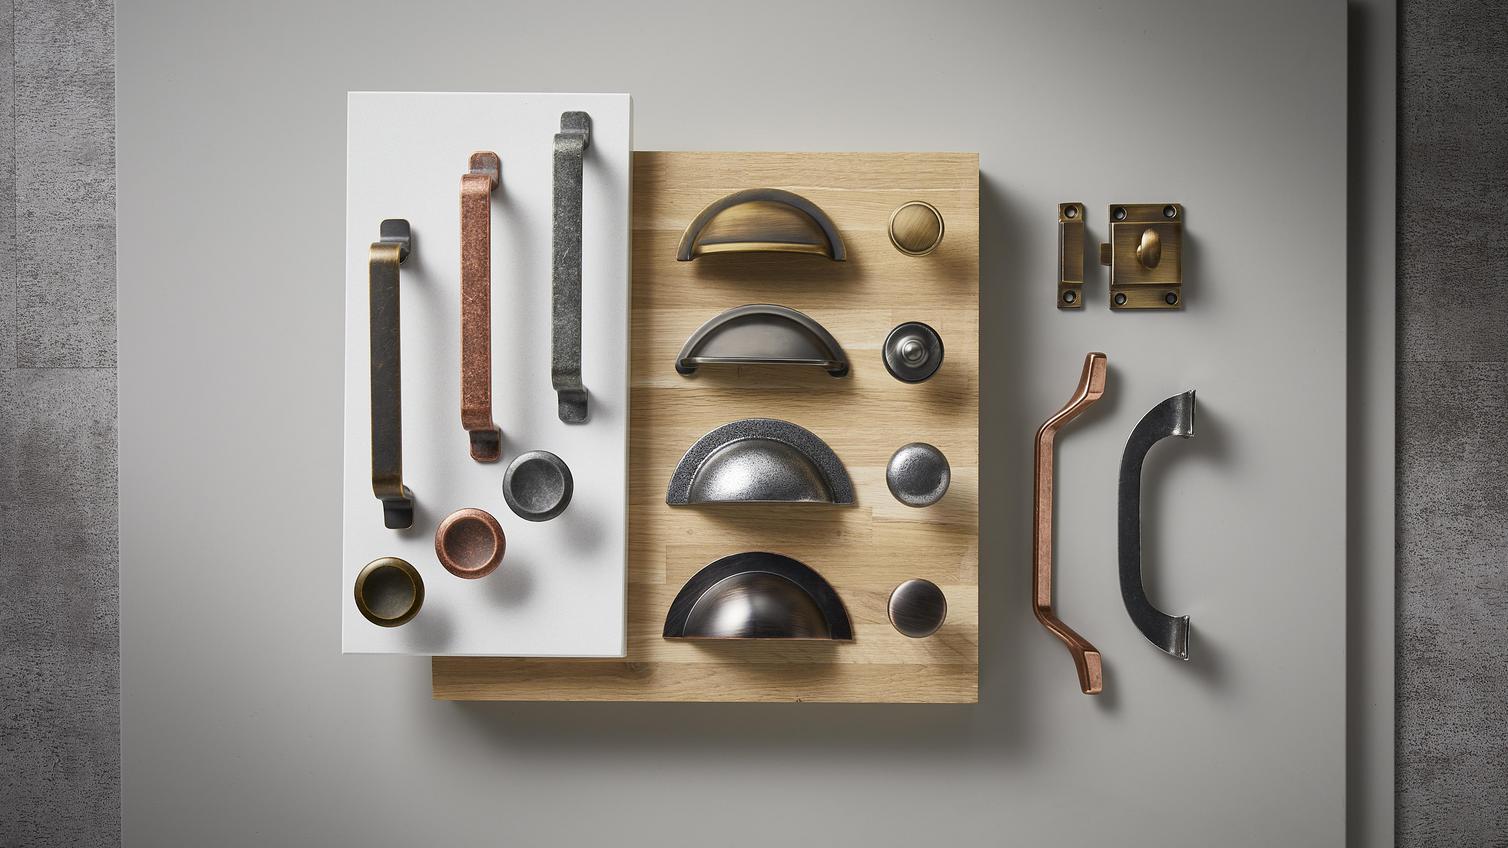 Crafted flat lay showing an oak slab and white slab with different cabinet handle styles in brass and brushed chrome.